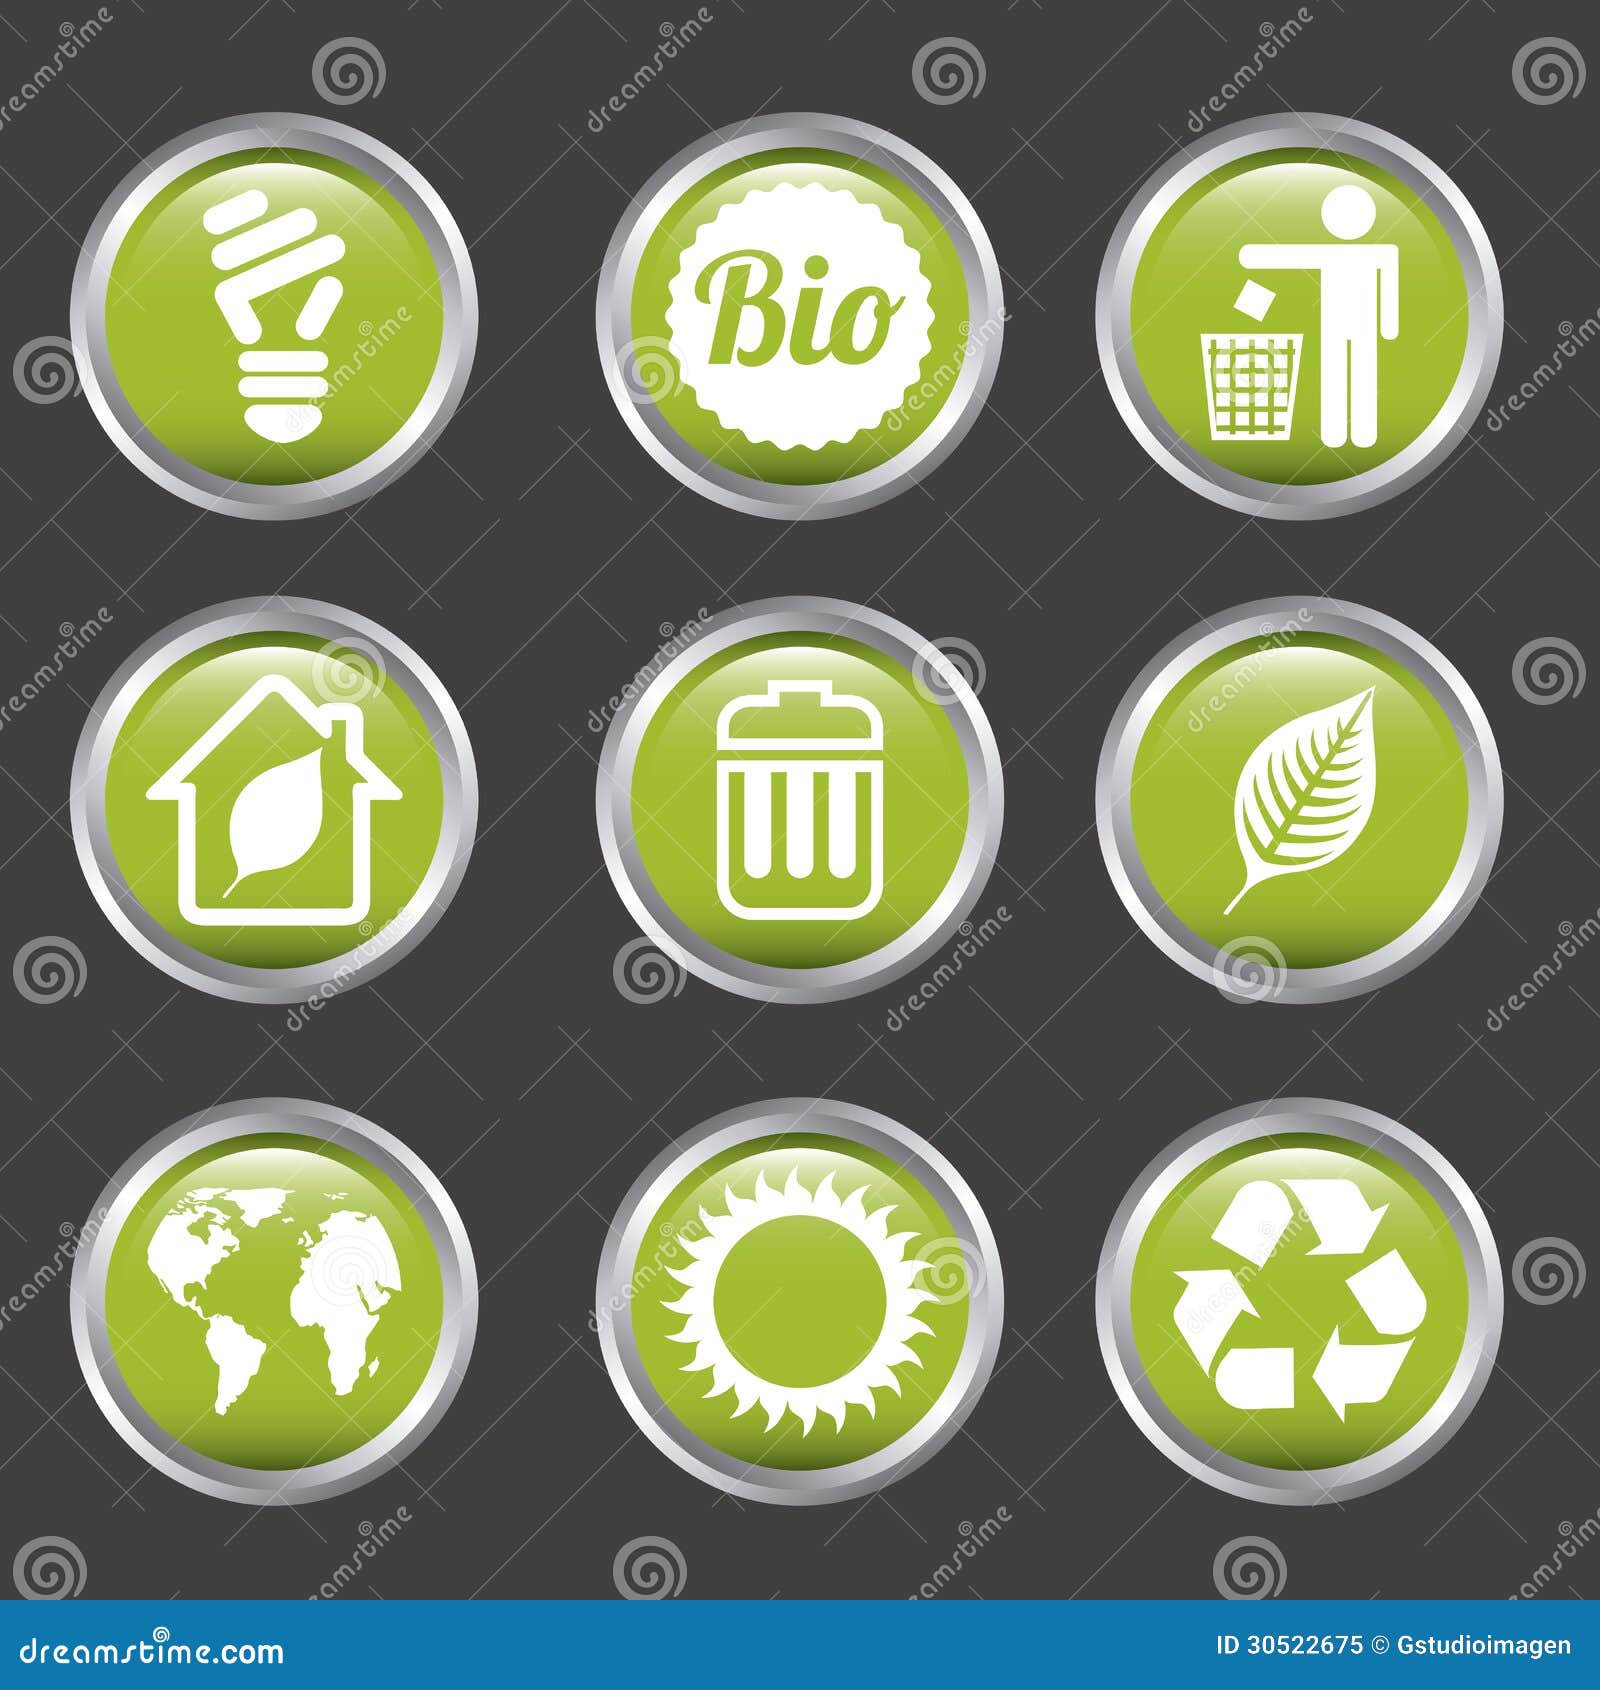 Ecology icons over gray background. vector illustration